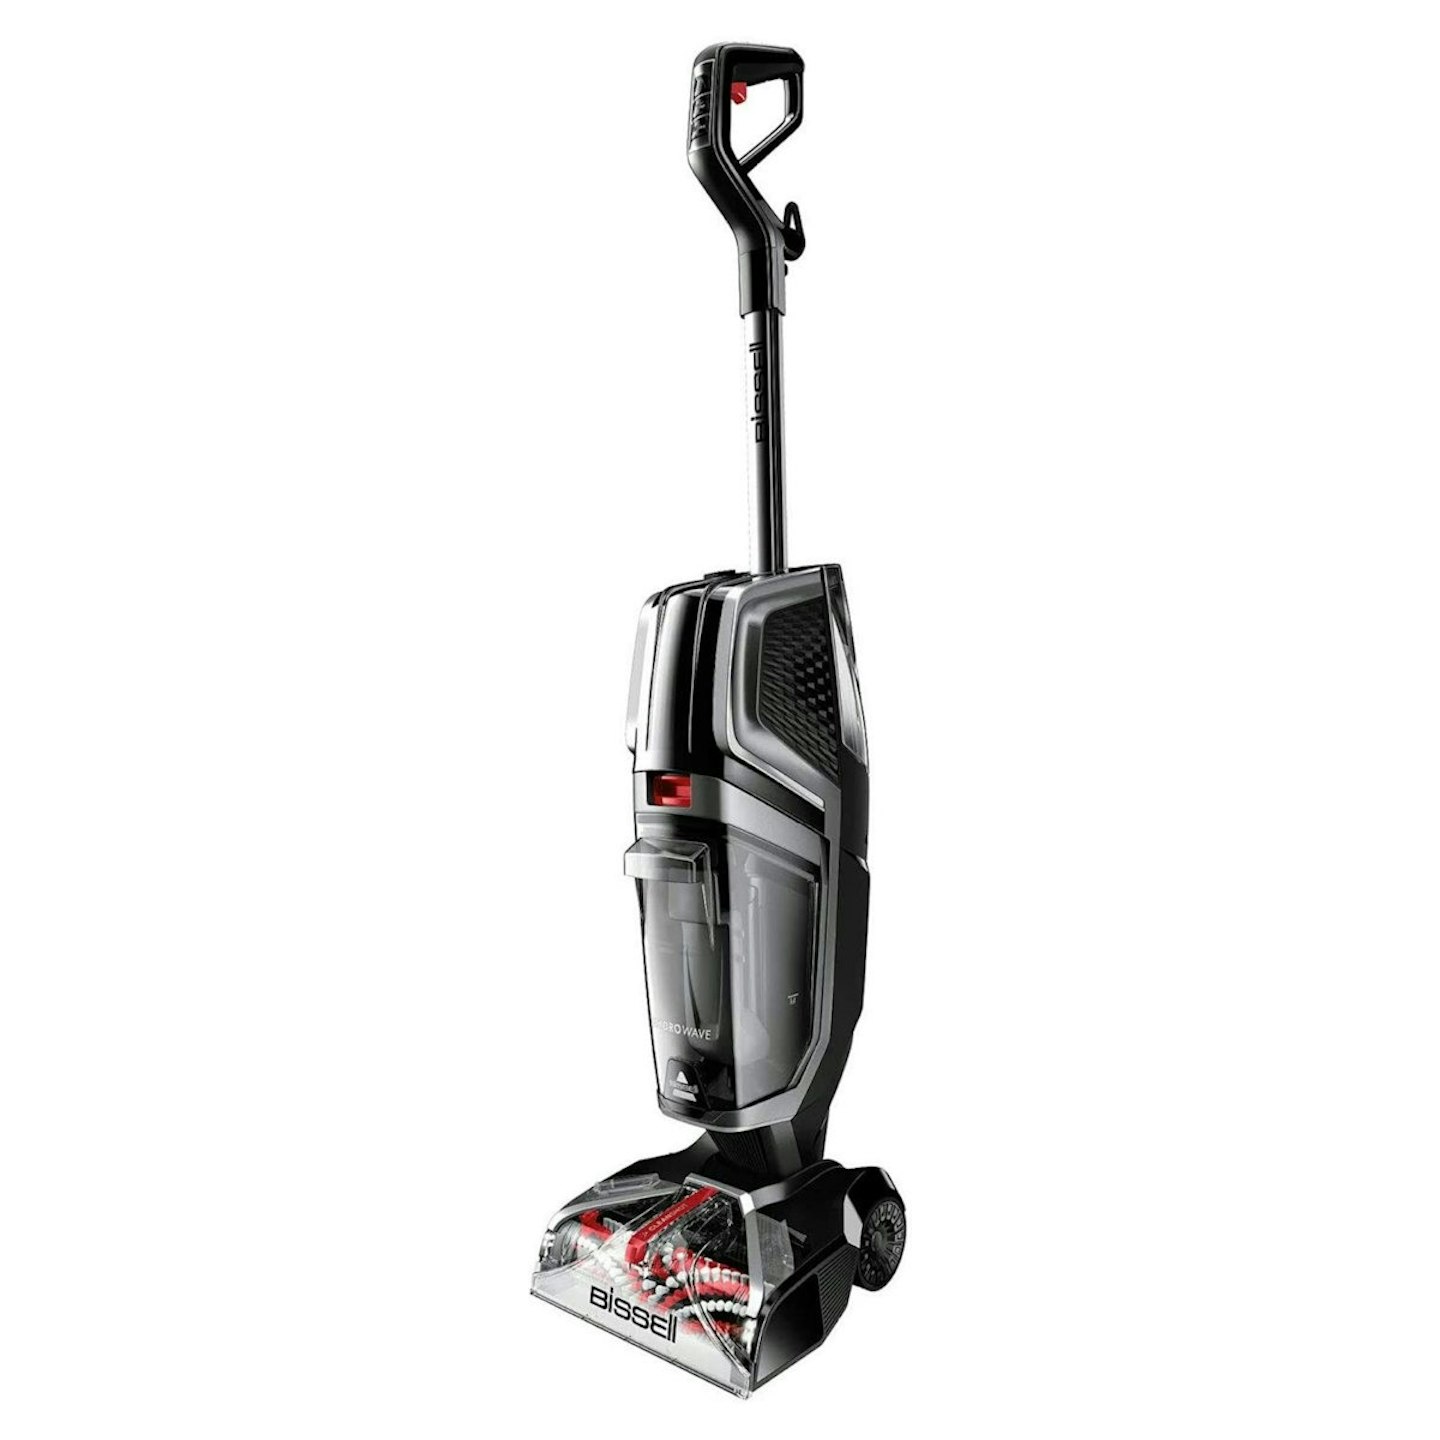 Bissell HydroWave 2571E Upright Compact Carpet Cleaner